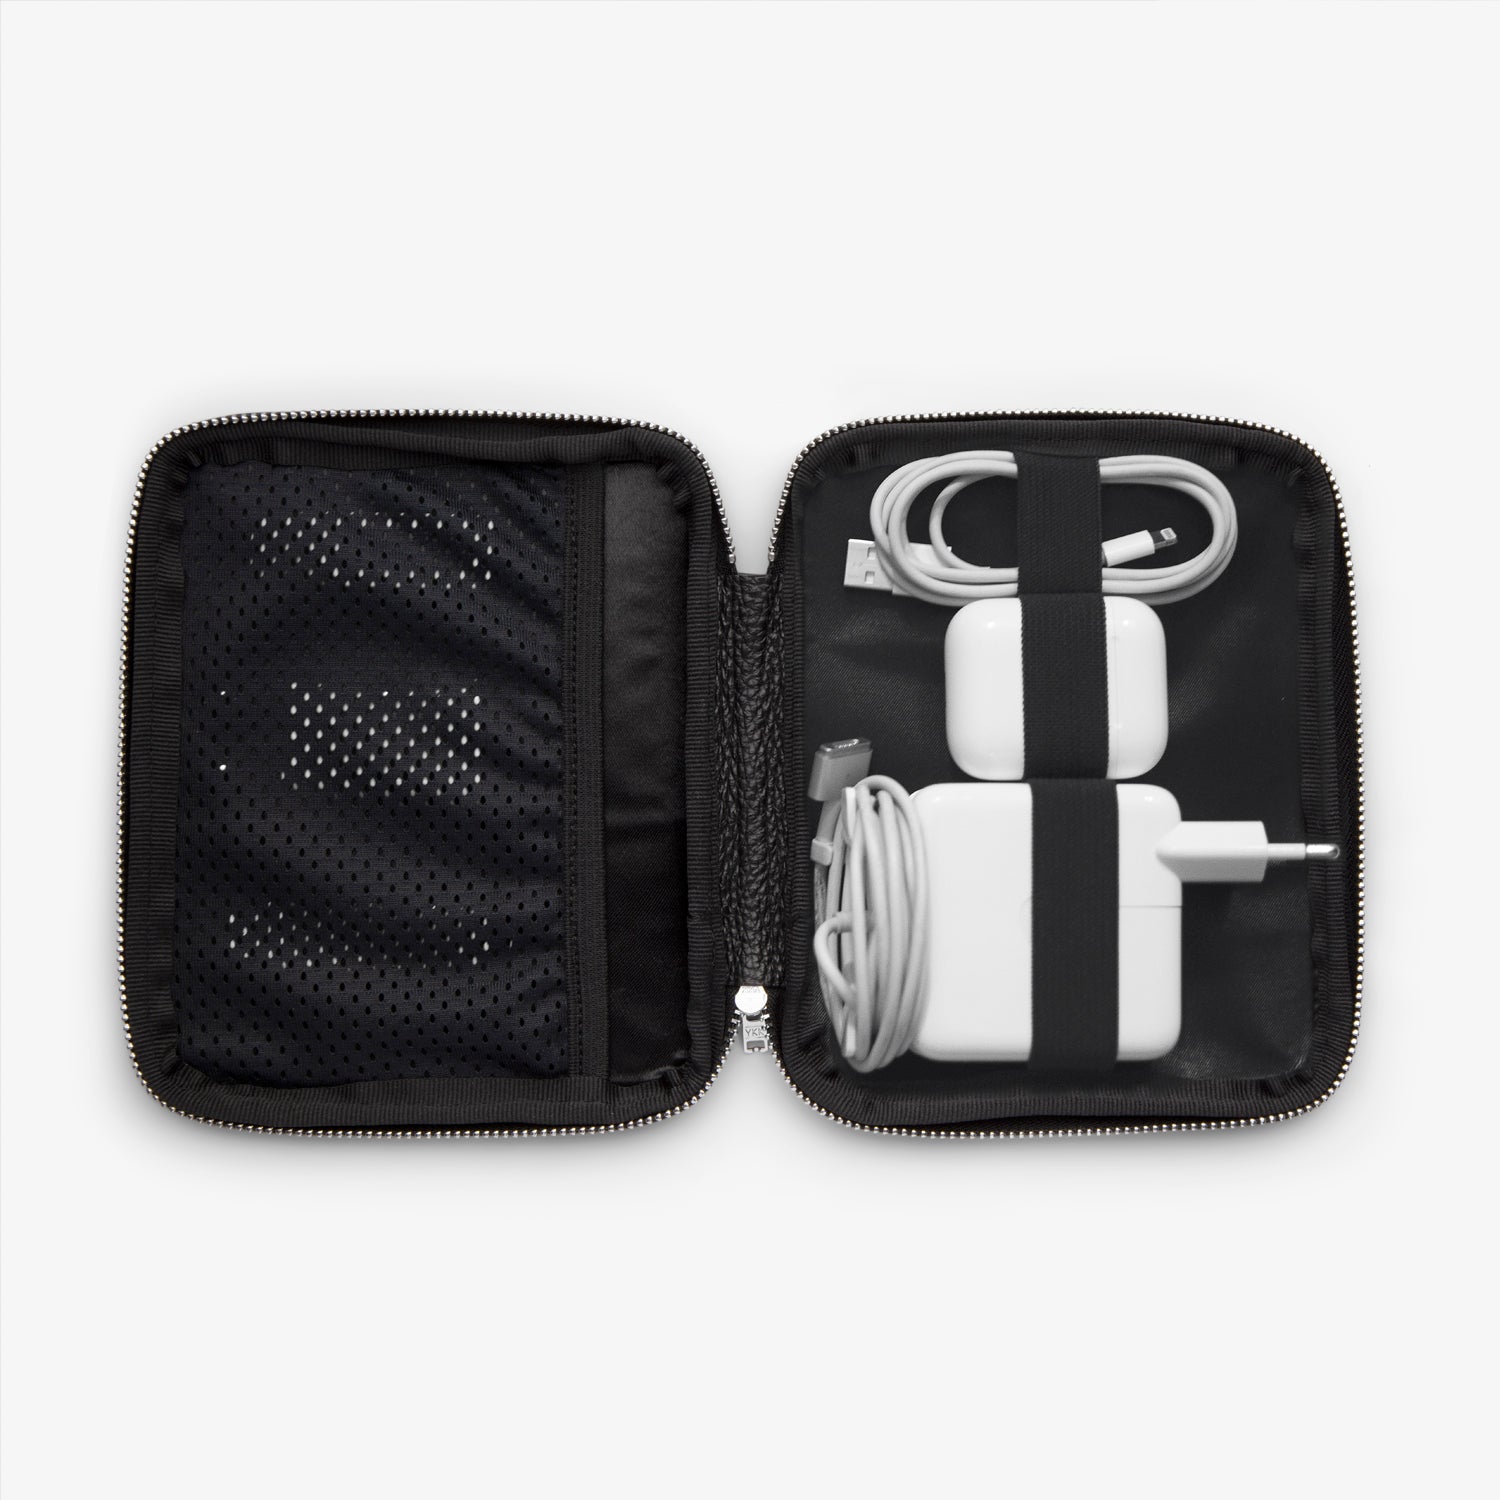 Cable pocket - The perfect tech organizer for work - Black/Silver